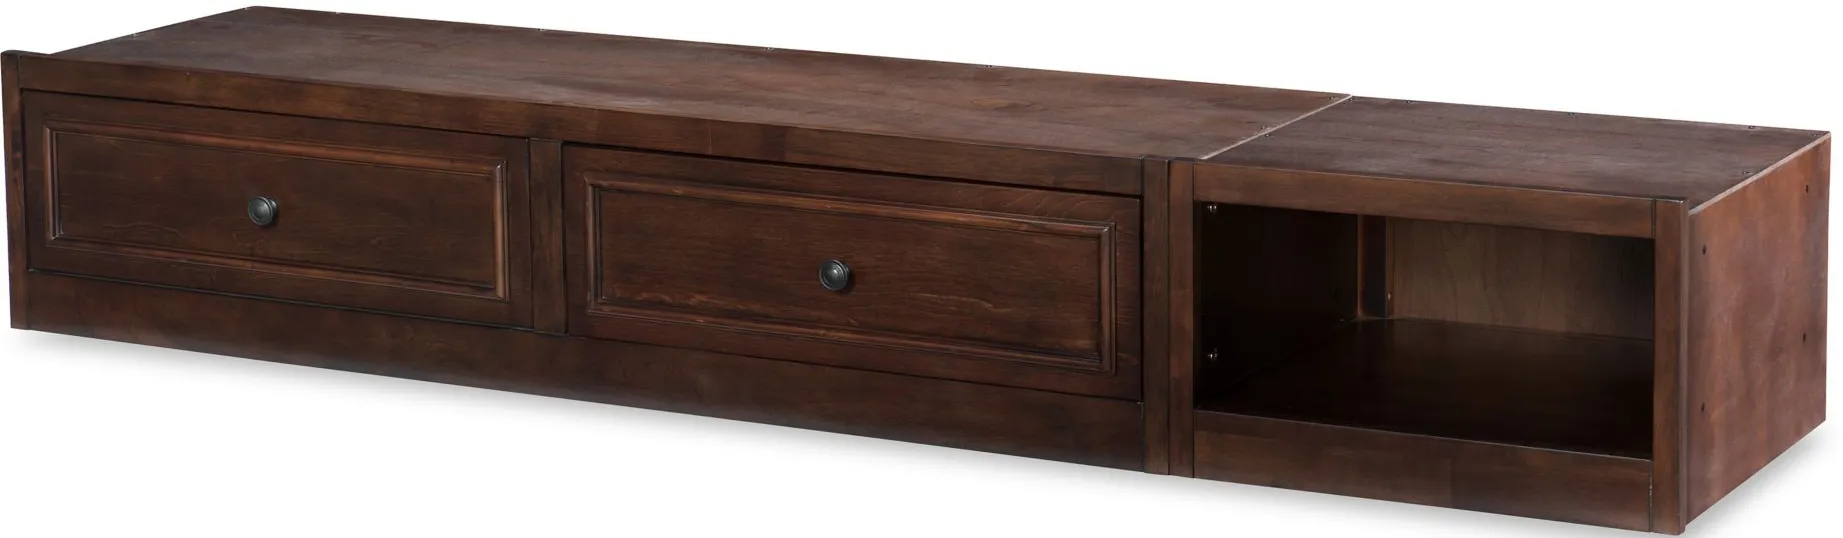 Canterbury Underbed Storage Unit in Warm Cherry by Legacy Classic Furniture